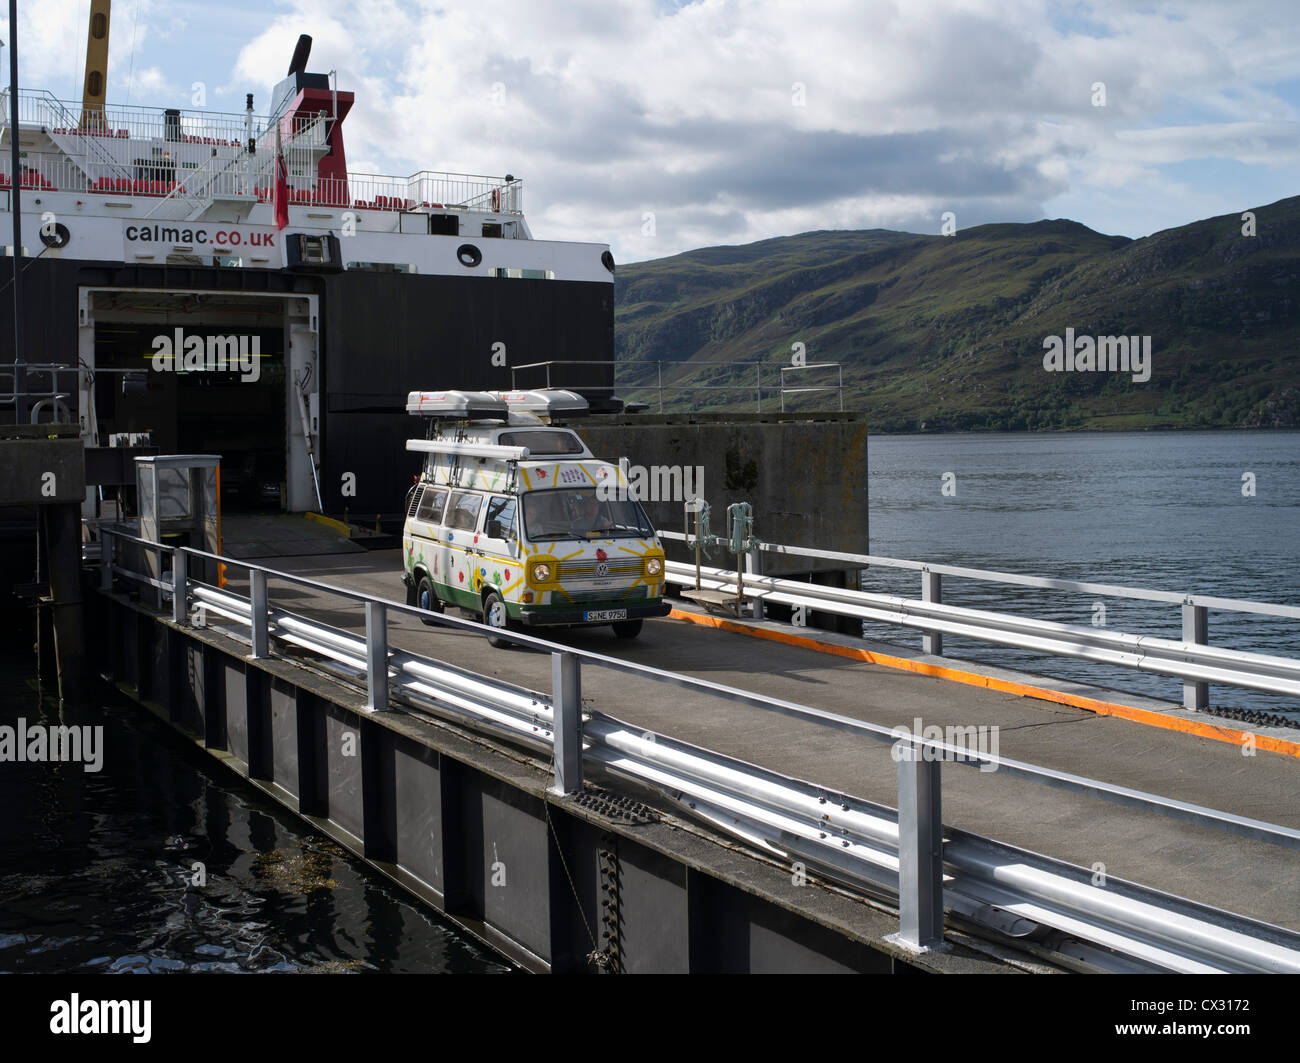 dh ferry terminal ULLAPOOL ROSS CROMARTY Outer Herbrides ferry Isle of Lewis discharging camper van scotland car scottish calmac ferries Stock Photo